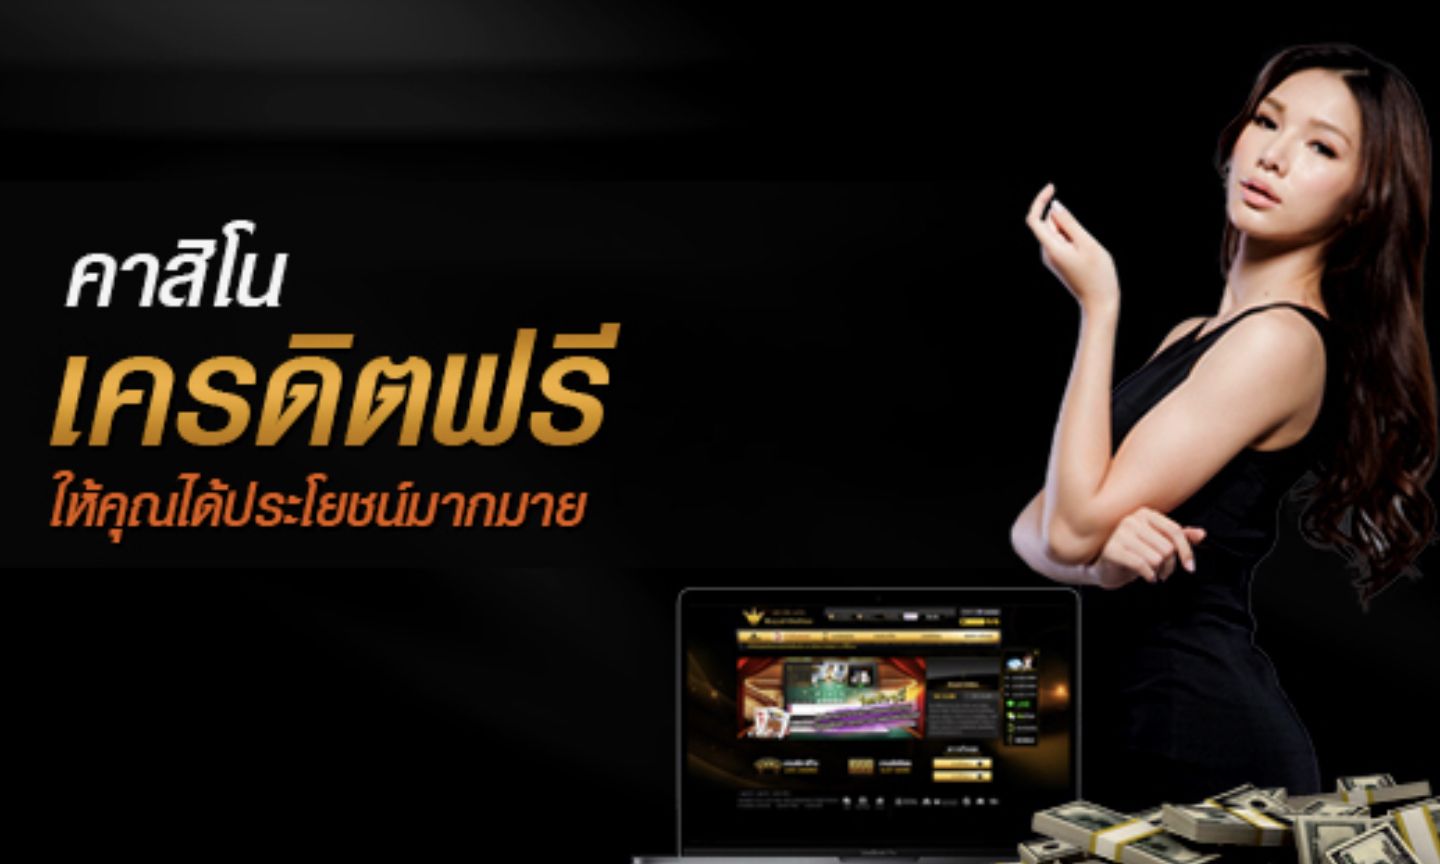 Why Are Online Casinos In Great Demand In Thailand?